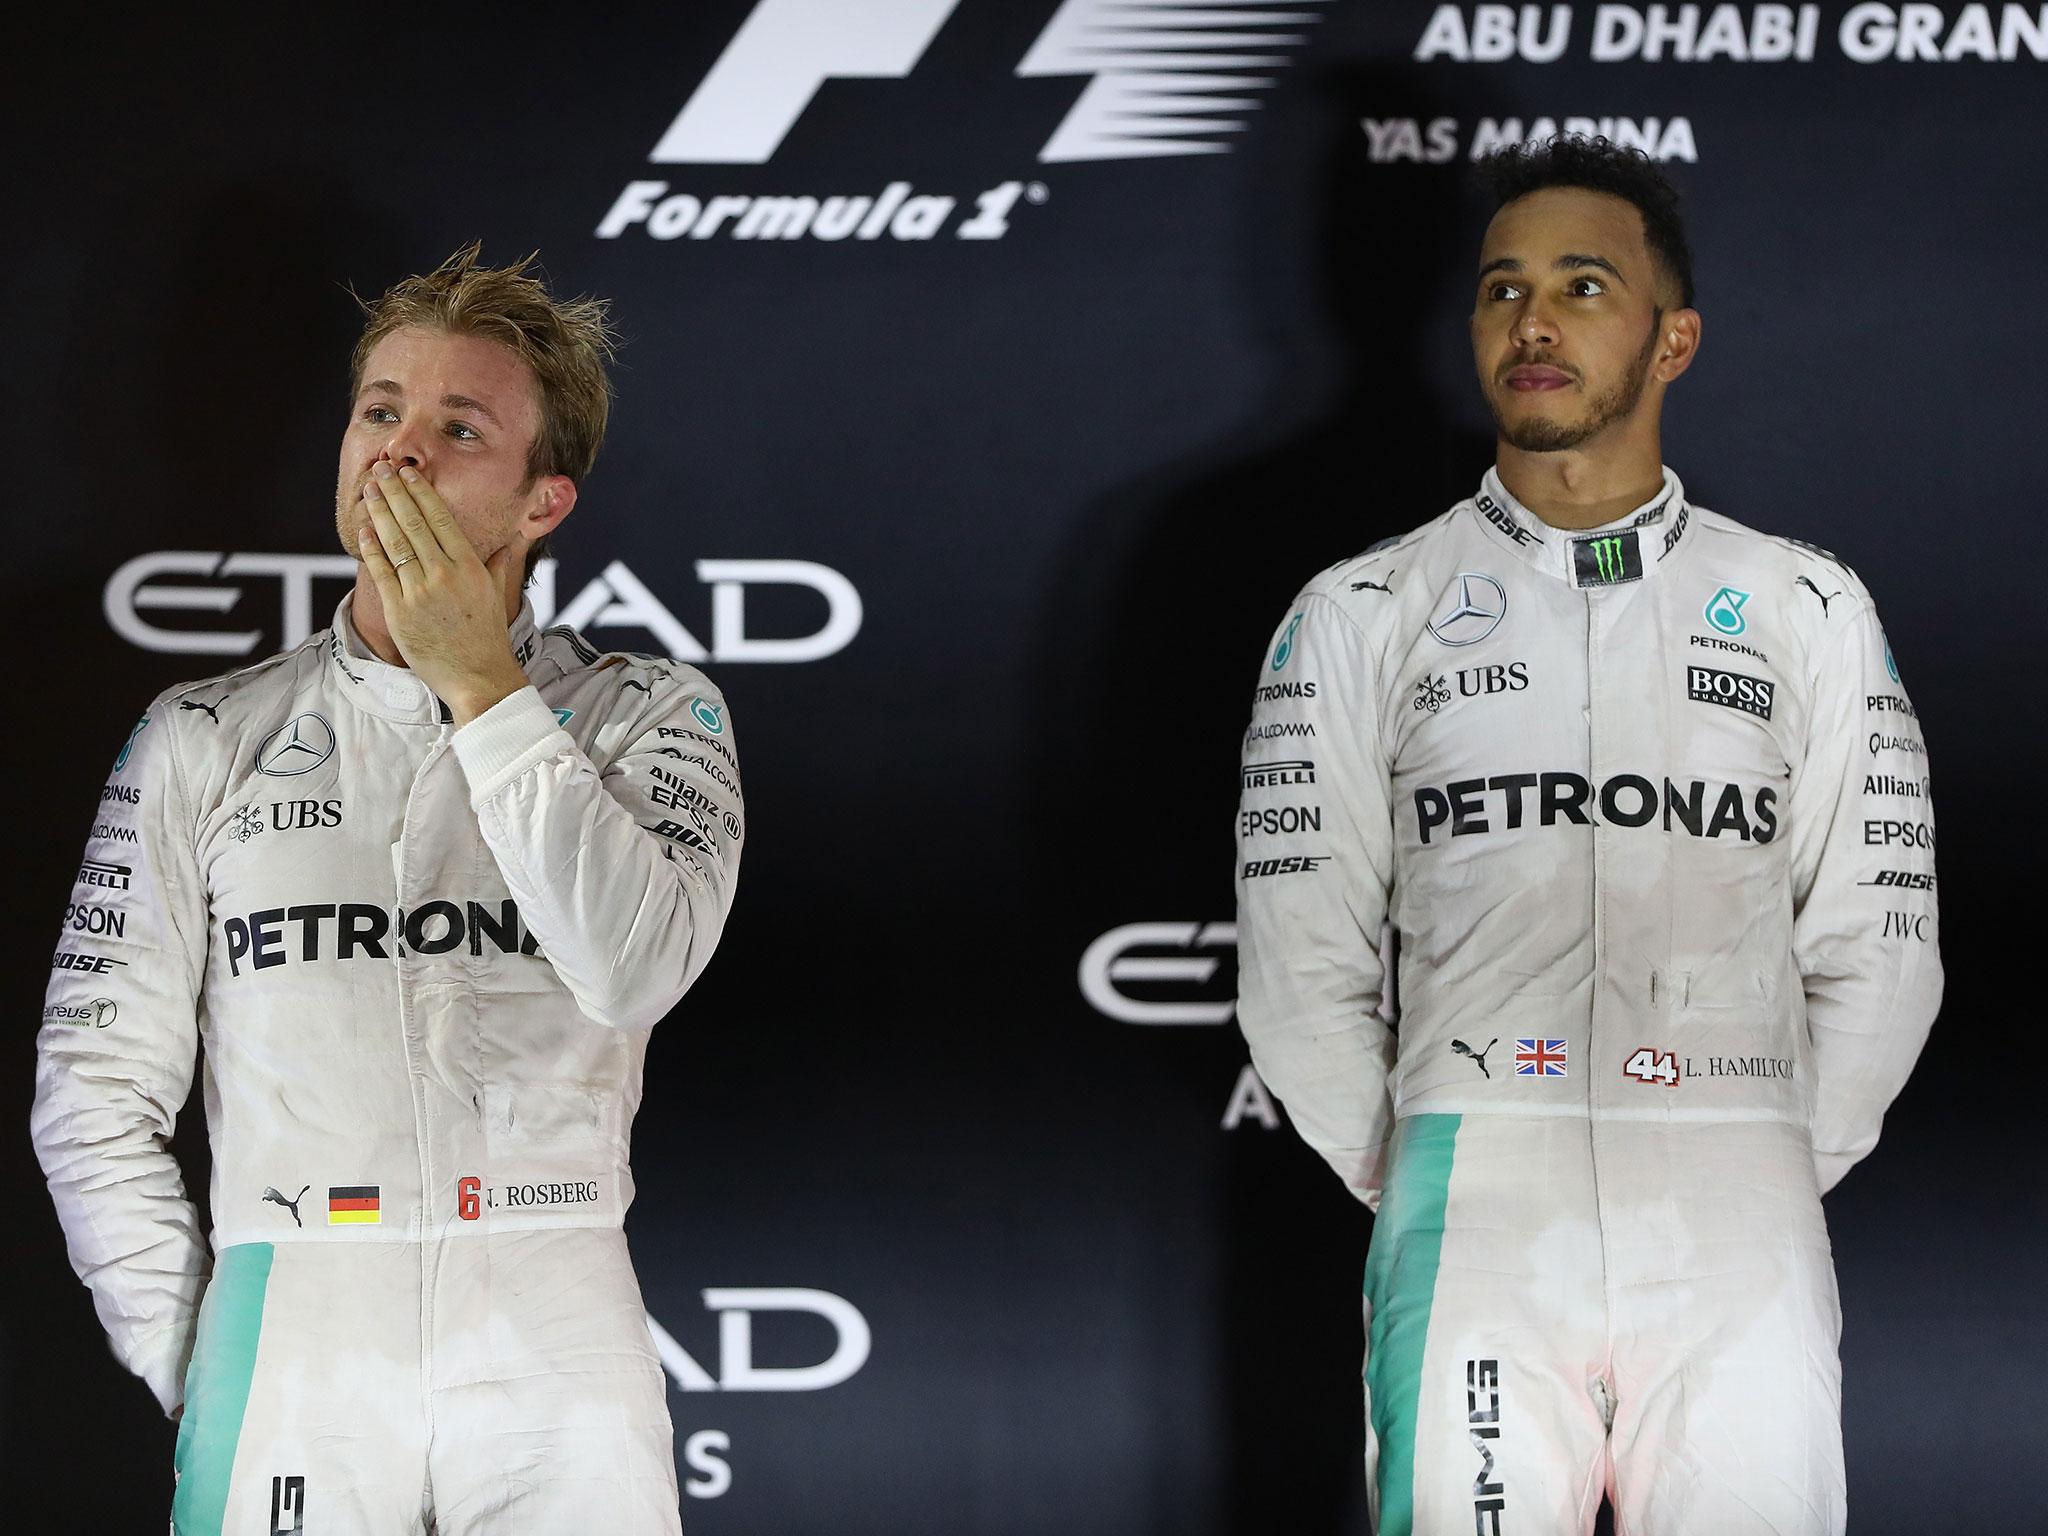 Lewis Hamilton may face disciplinary action for slowing down Nico Rosberg